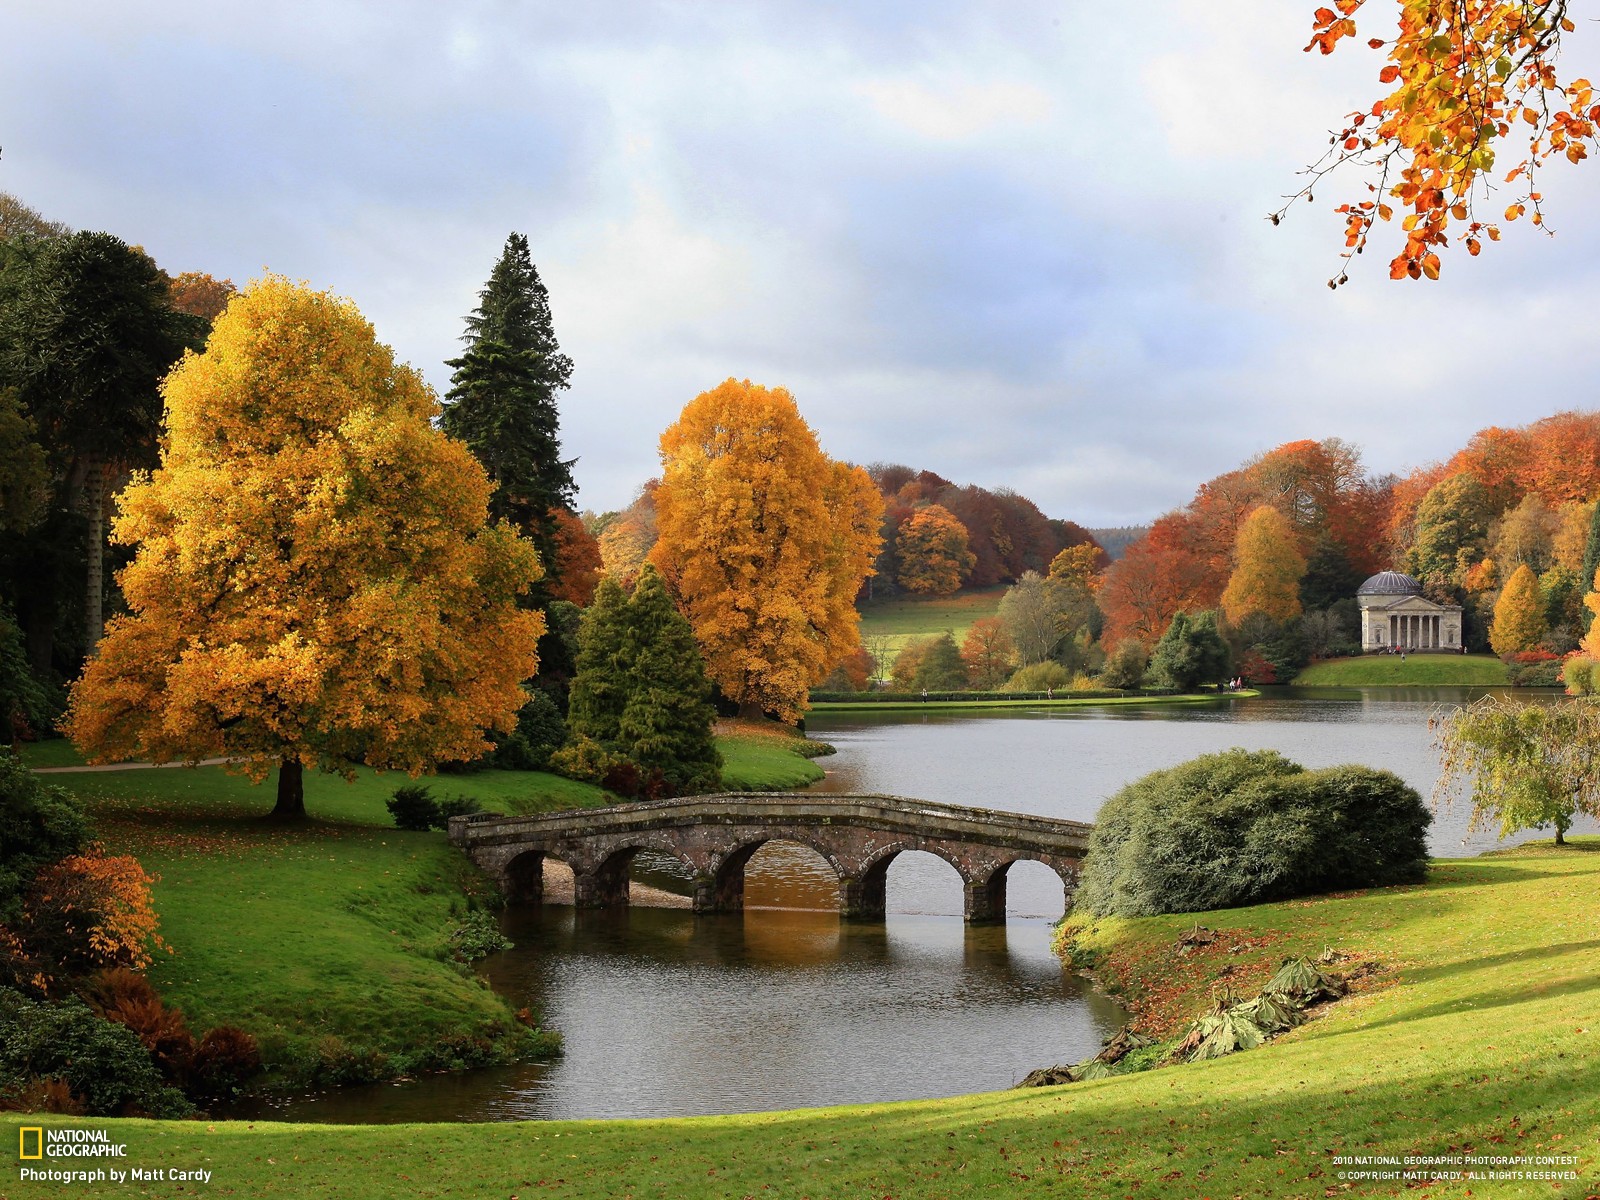 General 1600x1200 National Geographic landscape Stourhead England calm pond bridge fall park 2010 (Year) watermarked